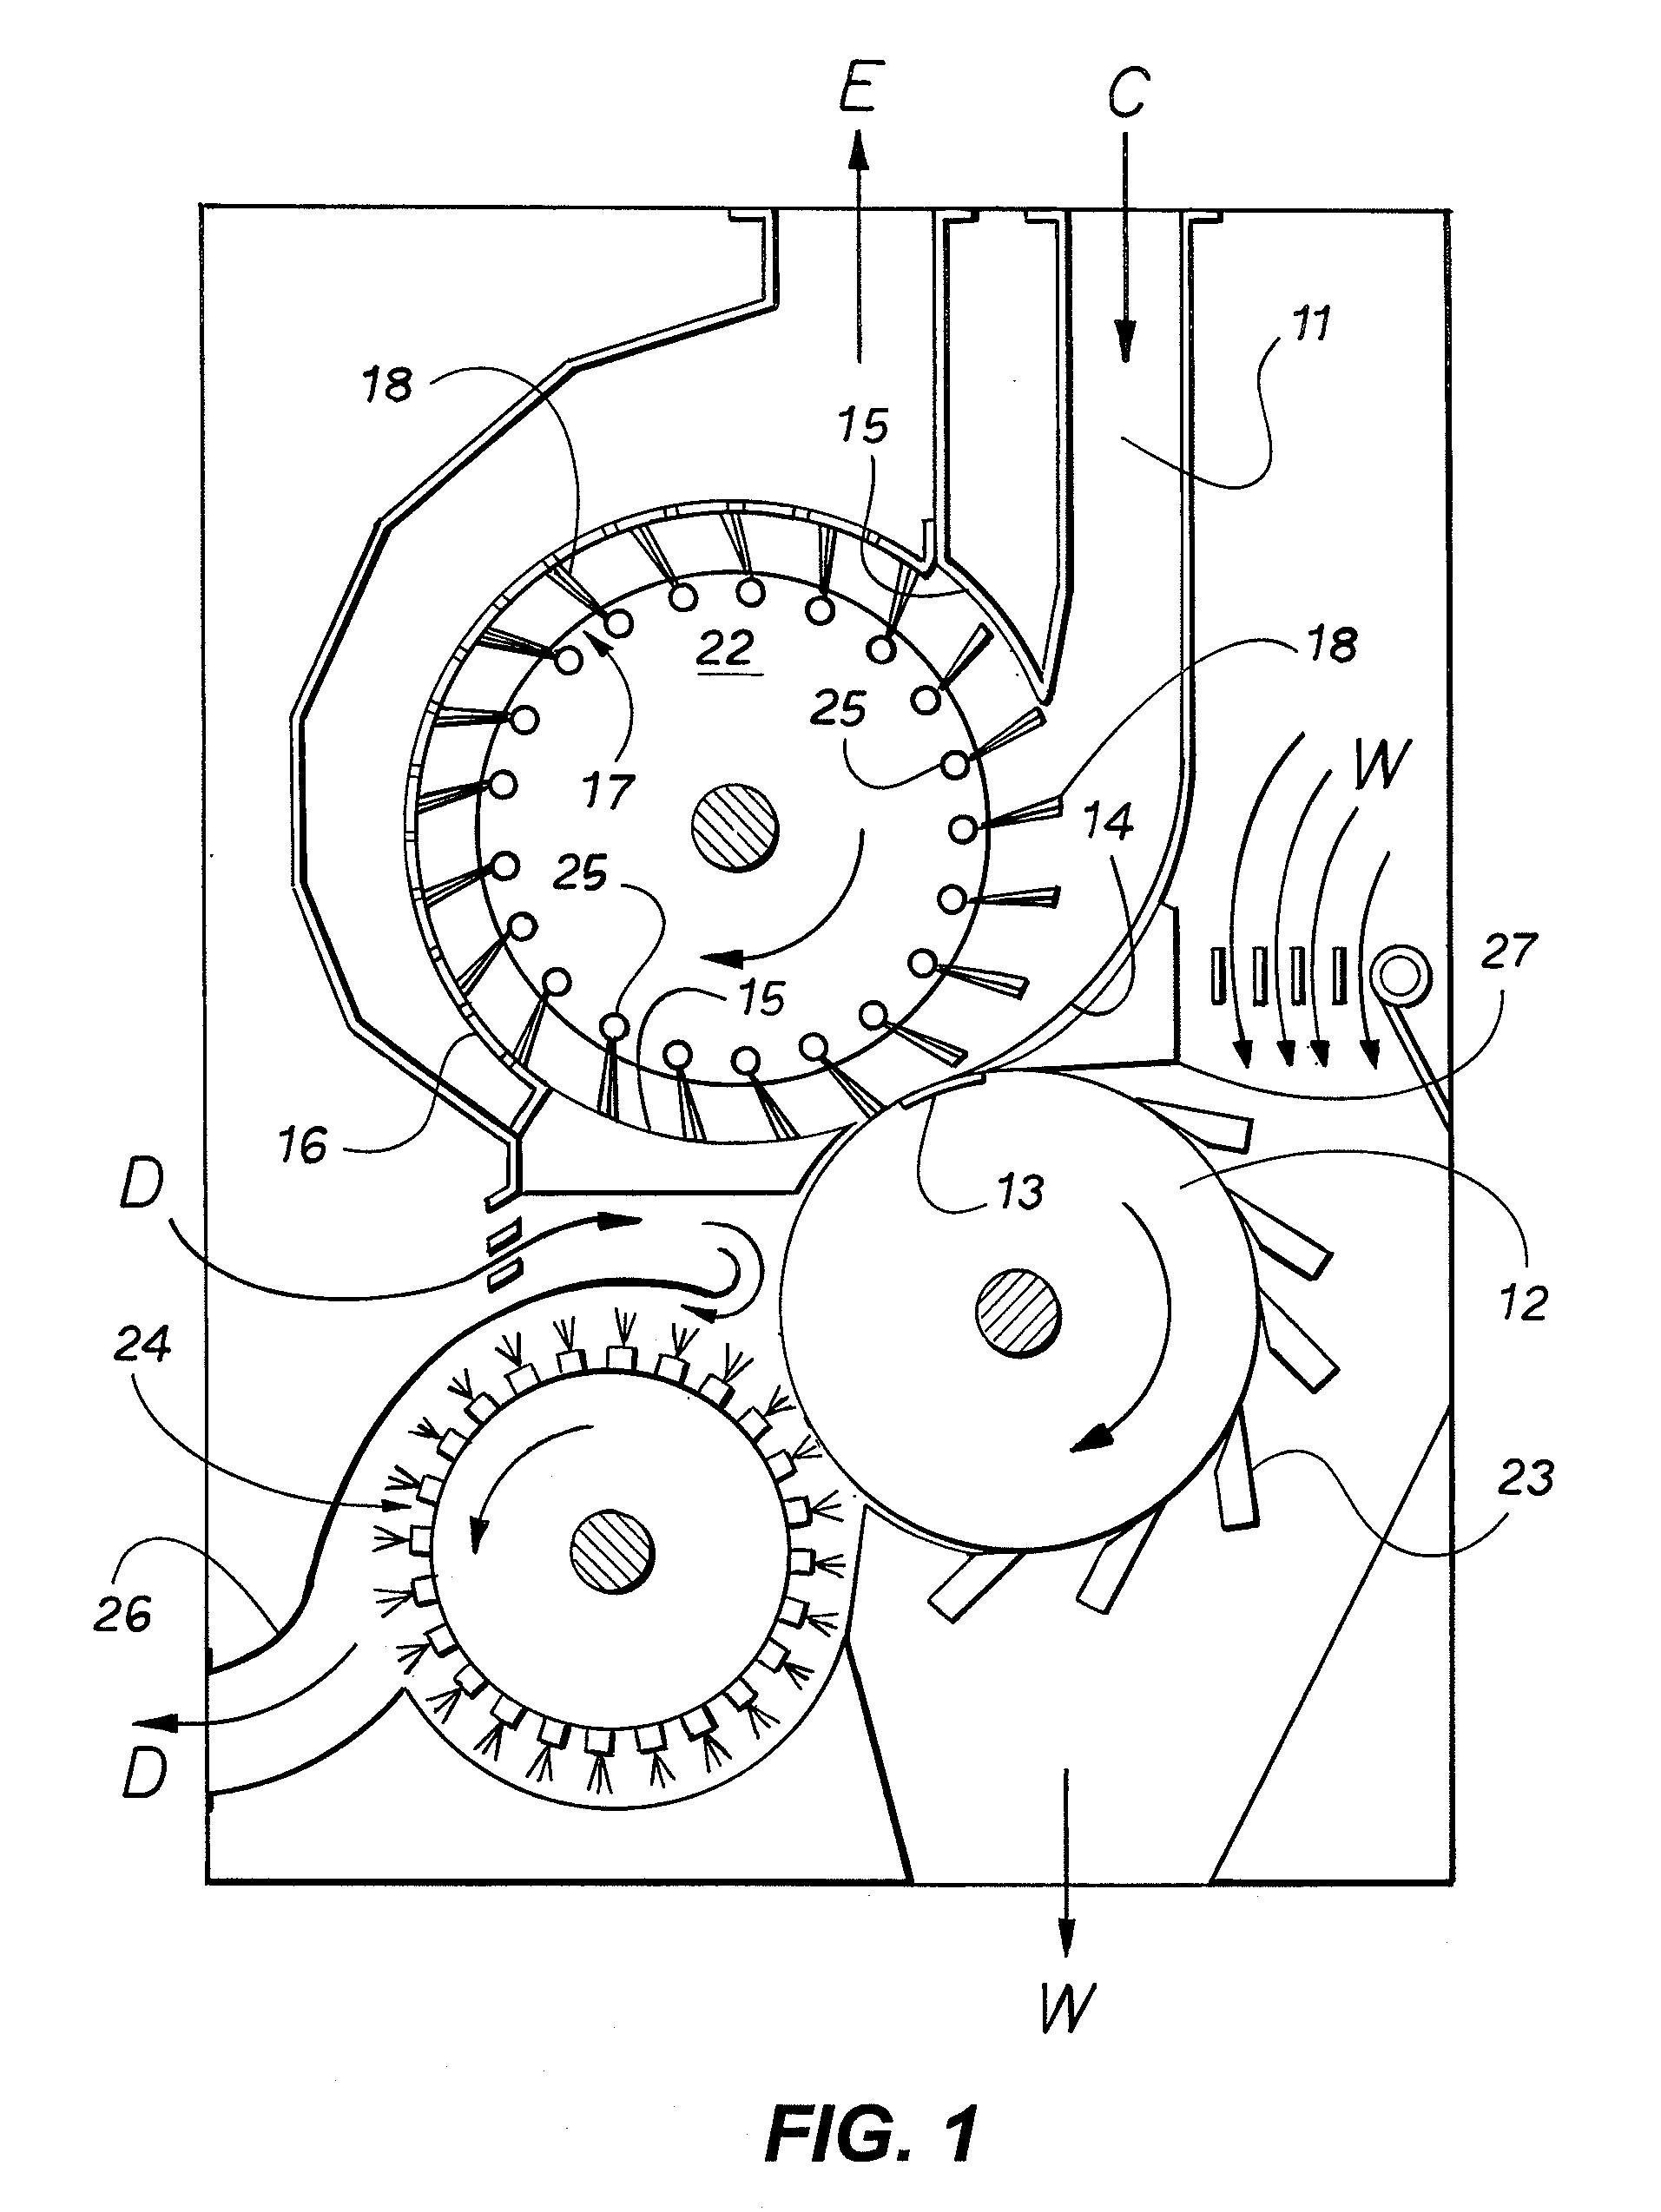 Method and Apparatus for Separating Foreign Matter From Fibrous Material